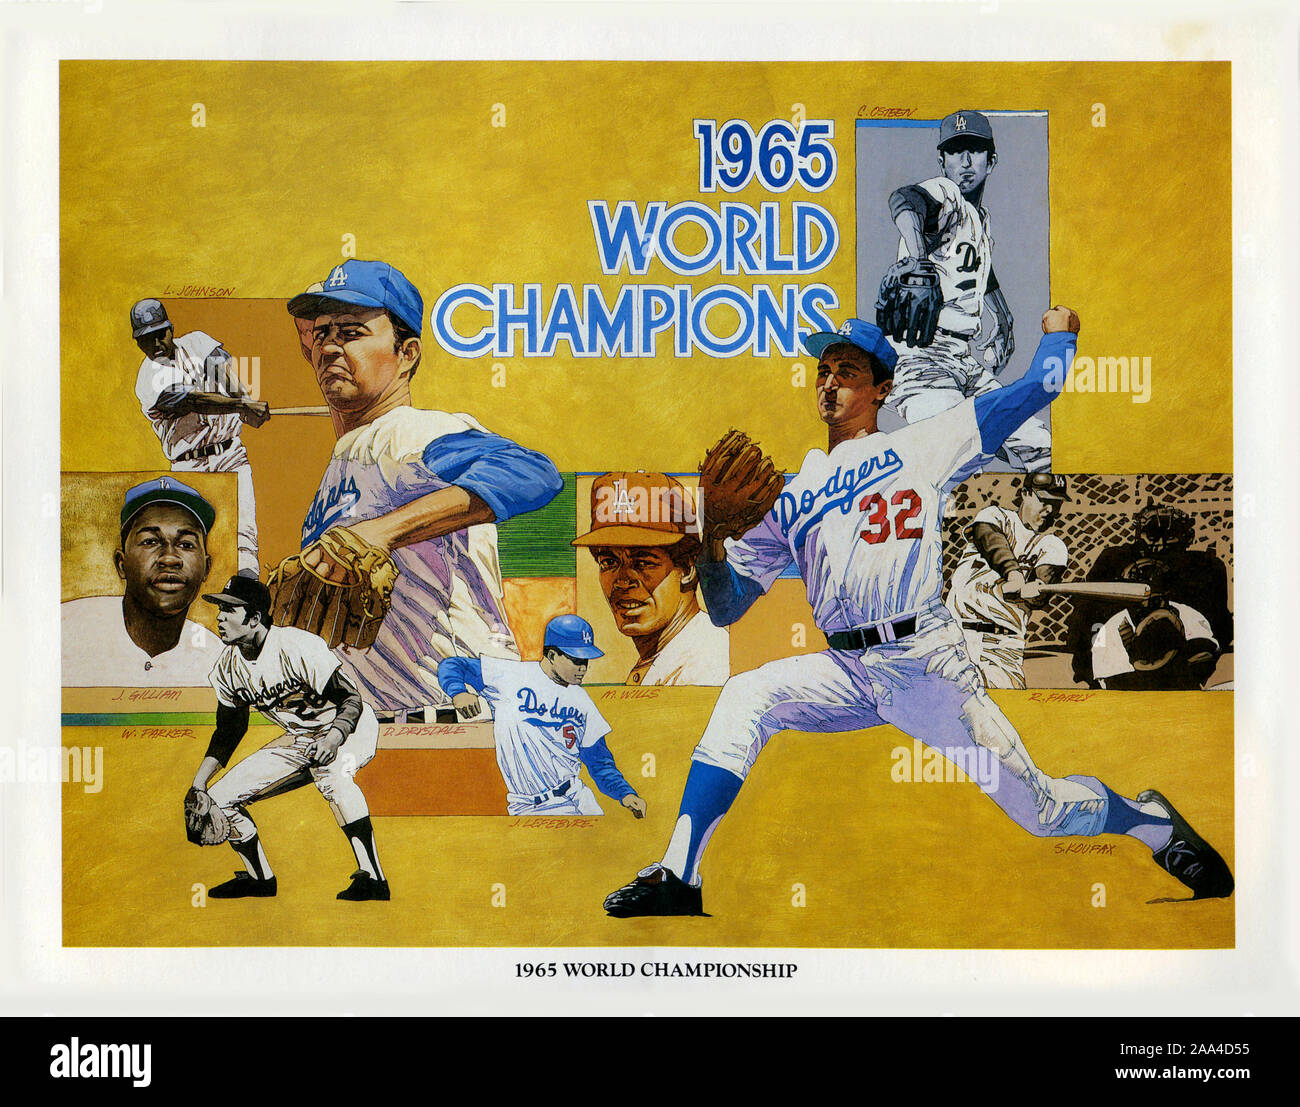 Collage artwork commemorating the Los Angeles Dodgers 1965 World Series Championship season by artist Paul Kratter was distributed as prints to fans of the Dodgers. Stock Photo